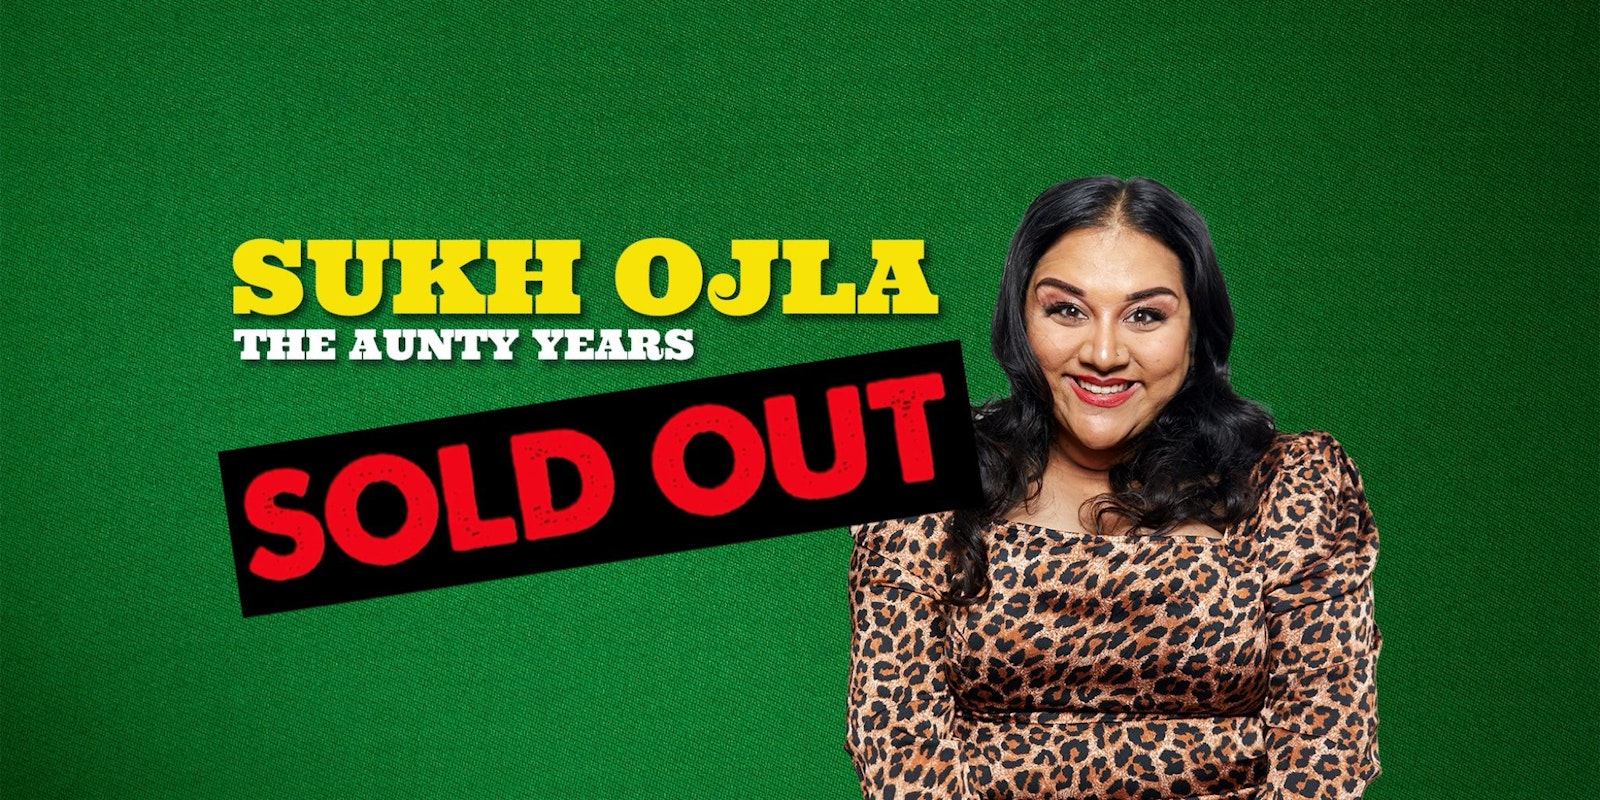 Sukh Ojla : The Aunty Years –  London Soho ** SOLD OUT – Join Waiting List **